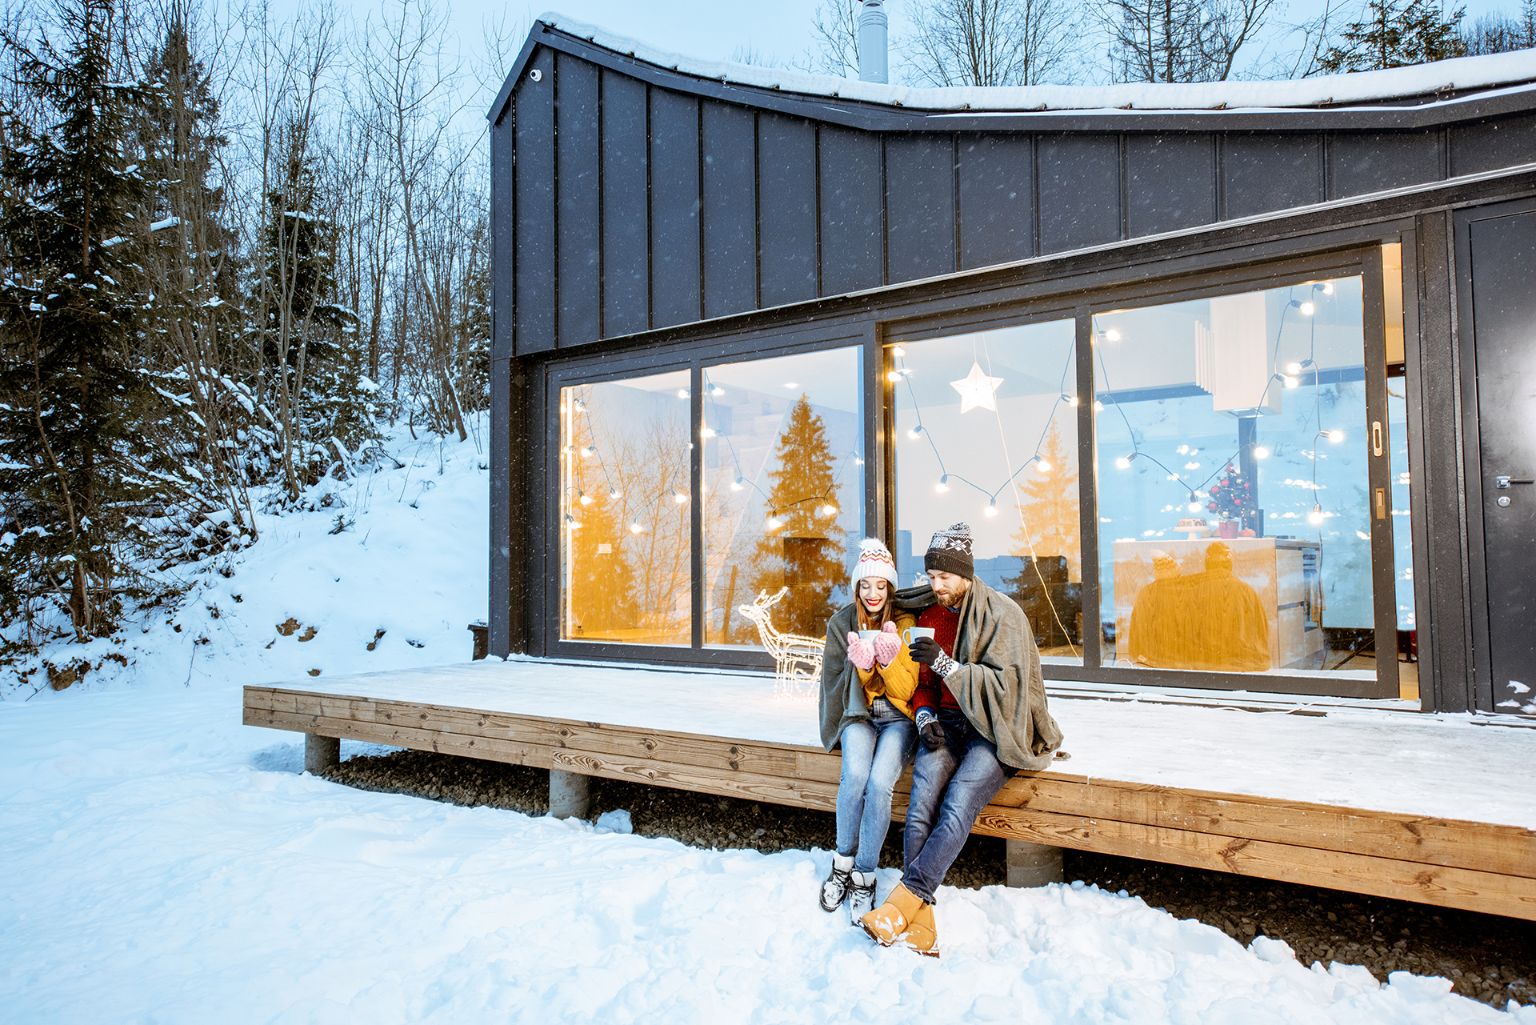 How do you heat a holiday home in the mountains?